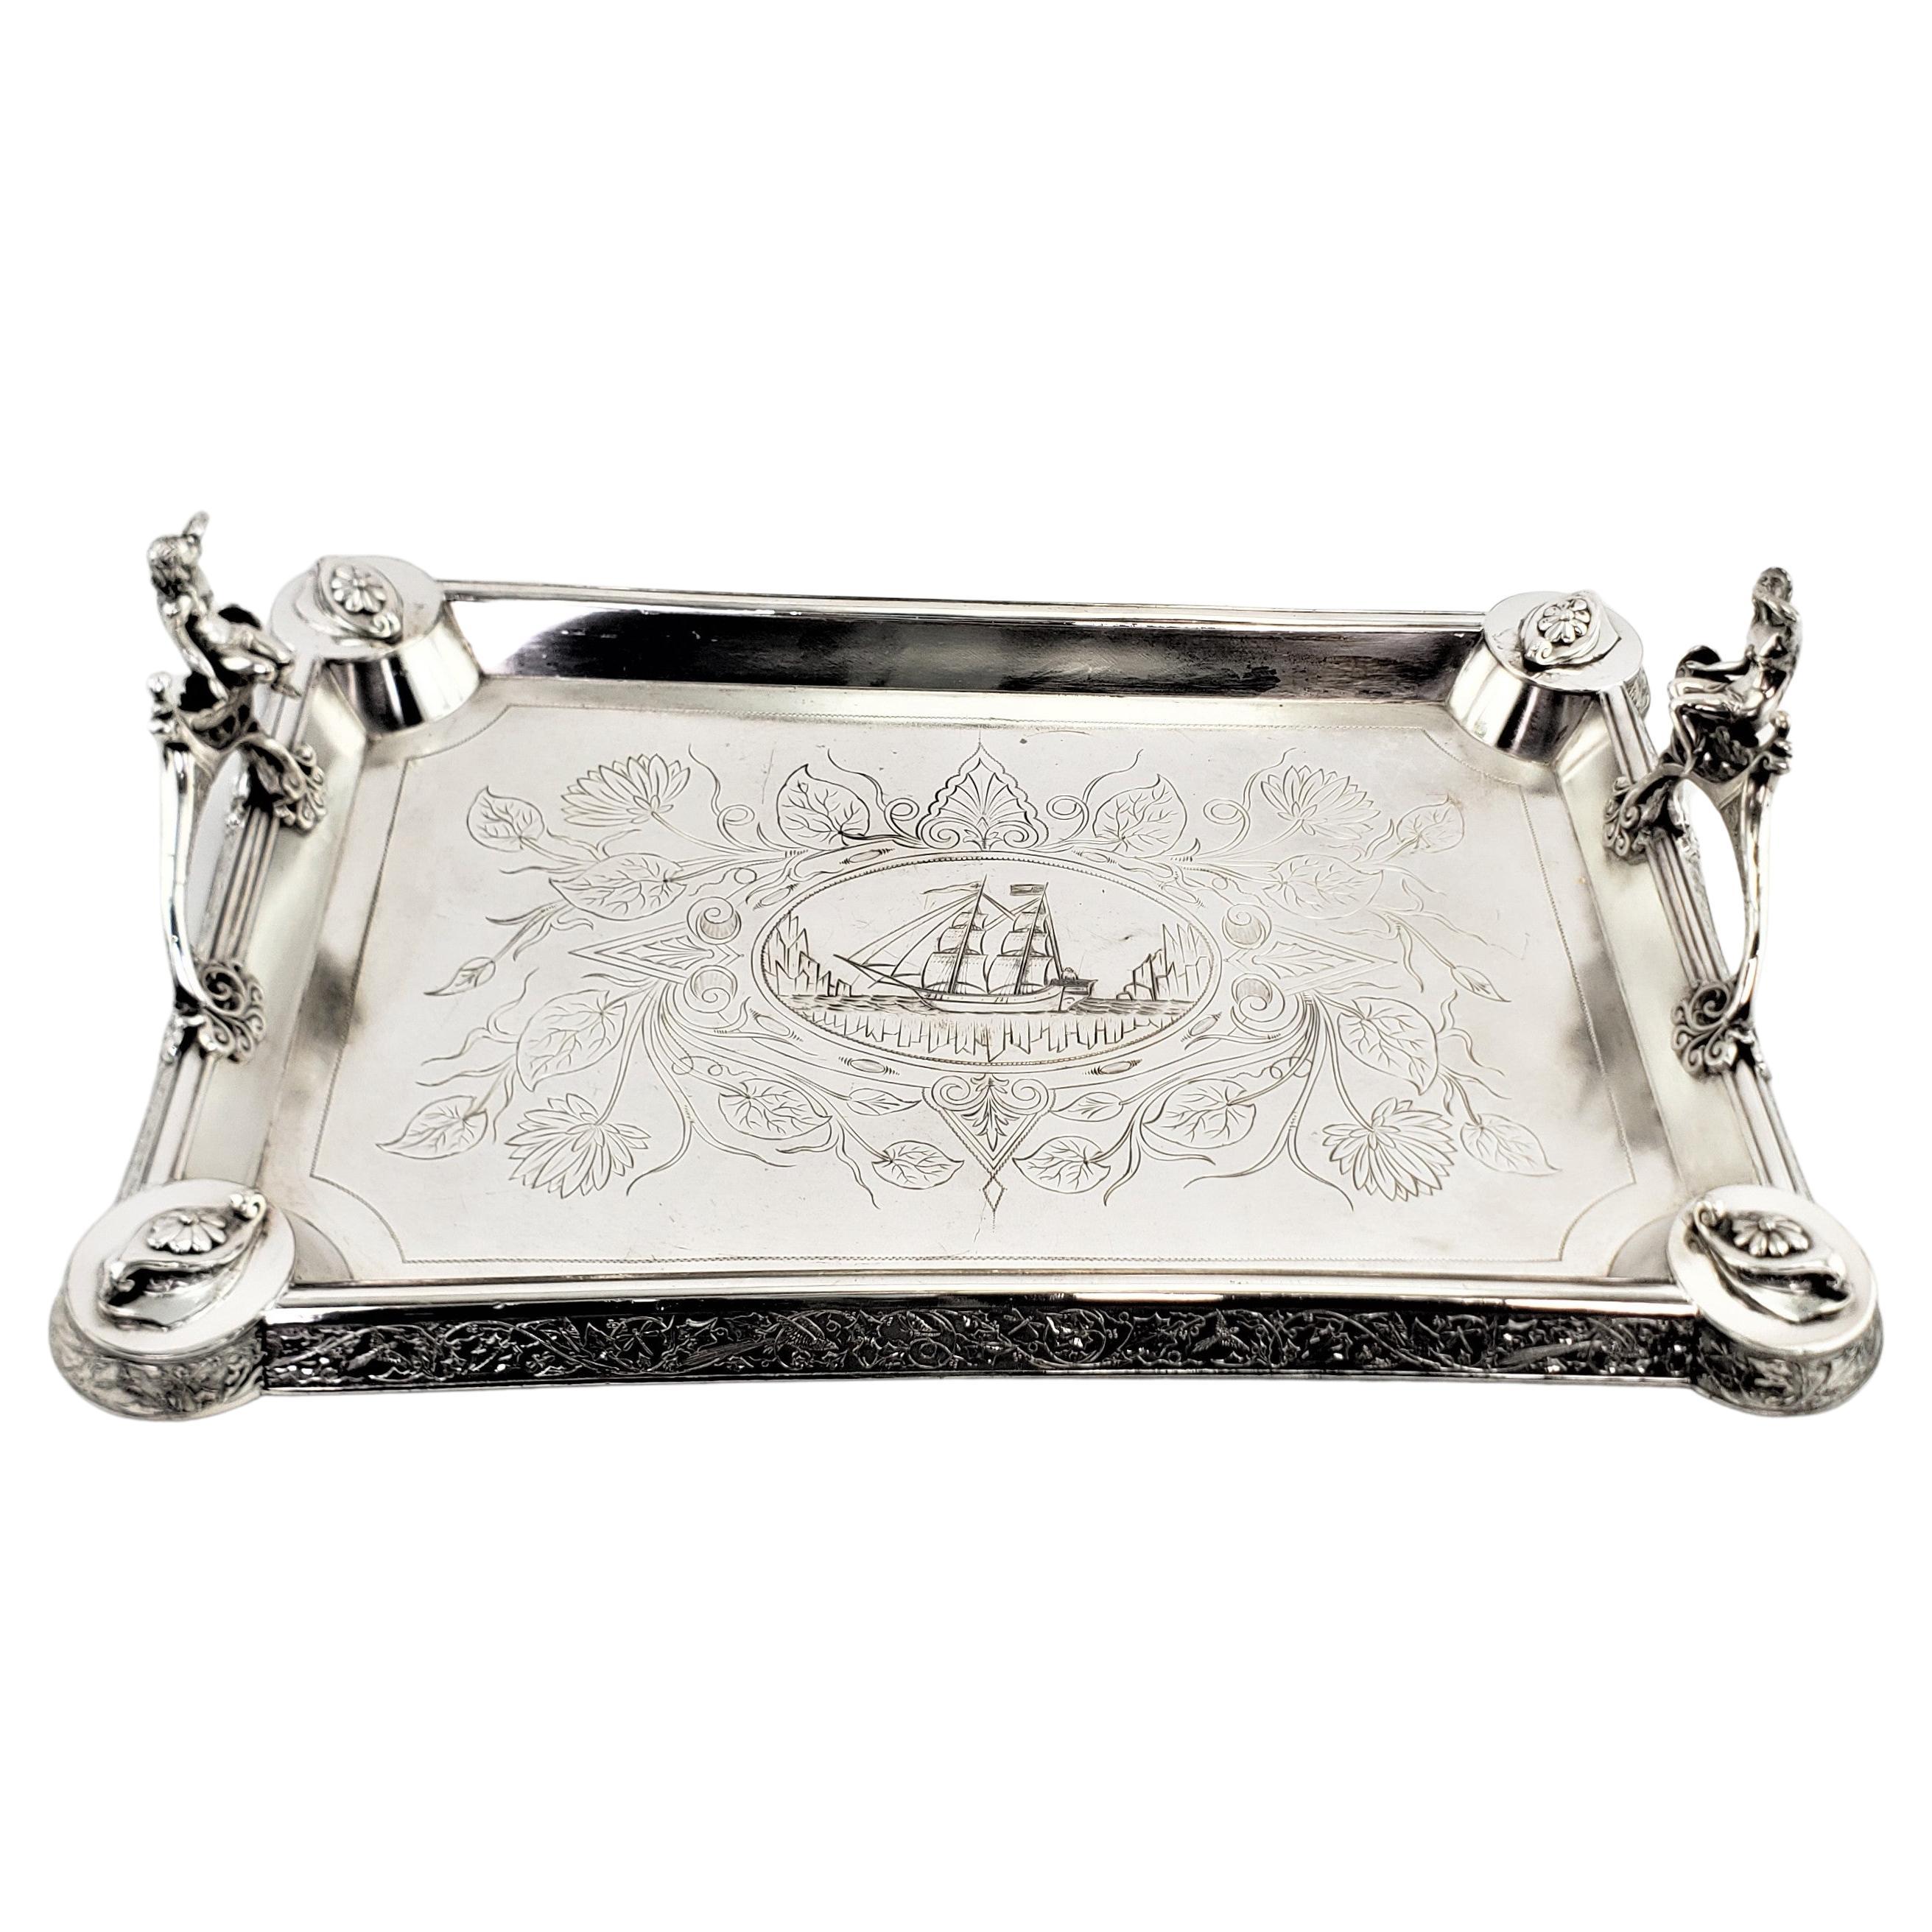 Antique Aesthetic Movement Silver Plated Serving Tray with Figural Siren Handles For Sale